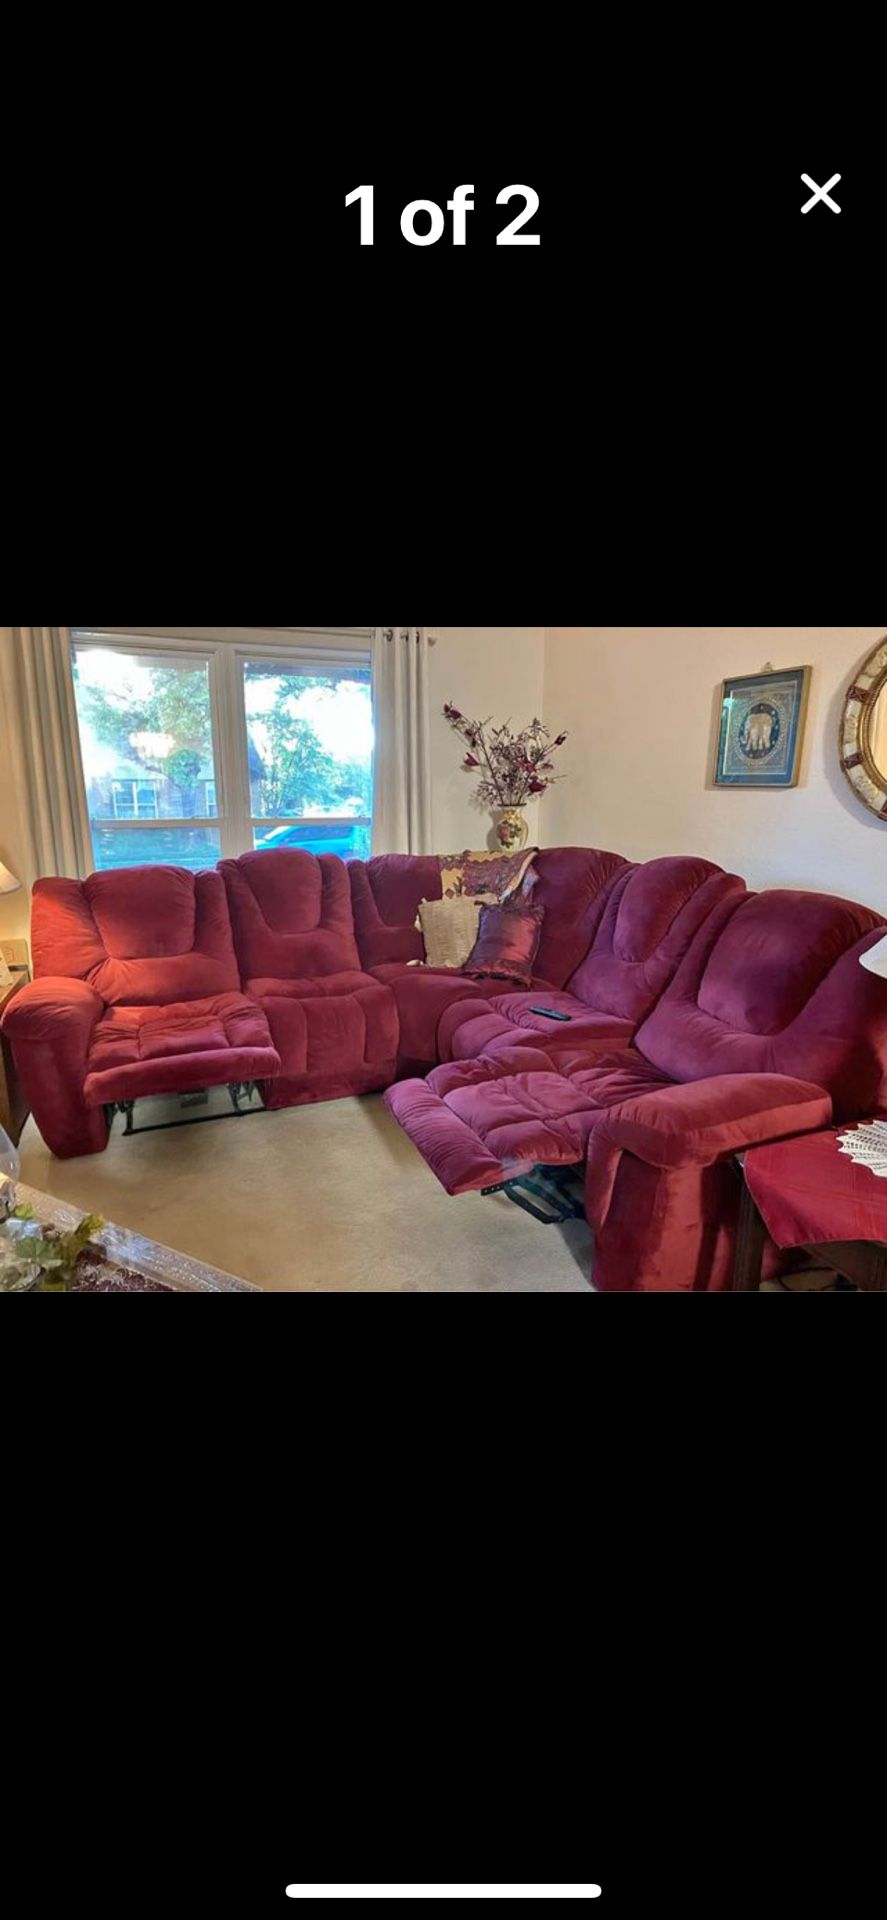 BEST OFFER Sectional Couch Or Best Reasonable Offer